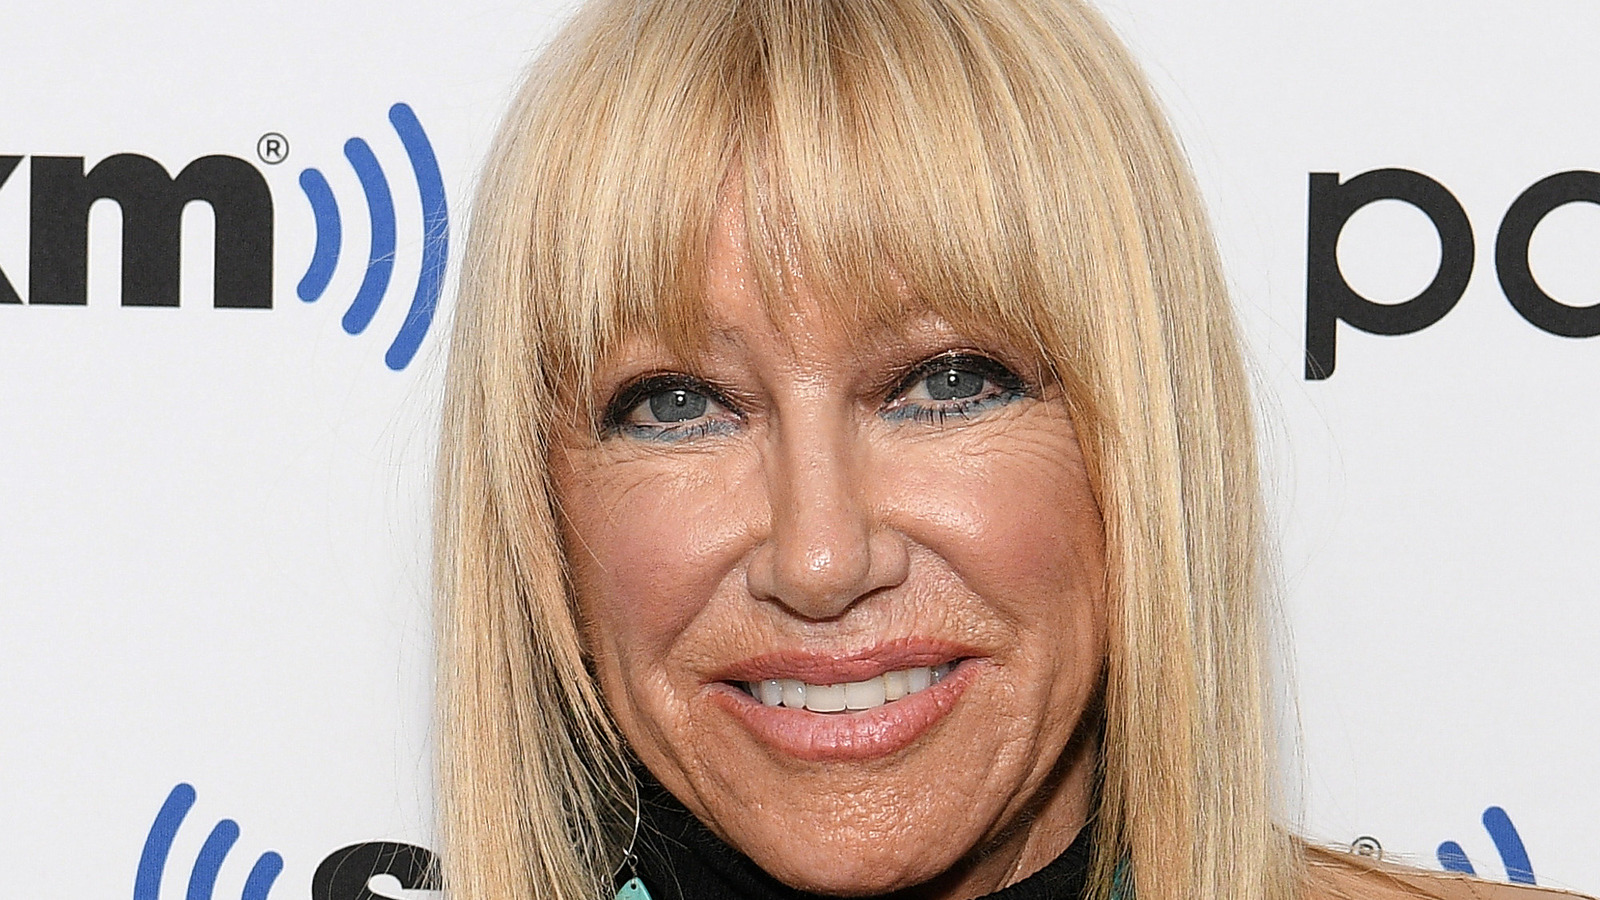 The Truth About The Intruder Incident At Suzanne Somers' Home.